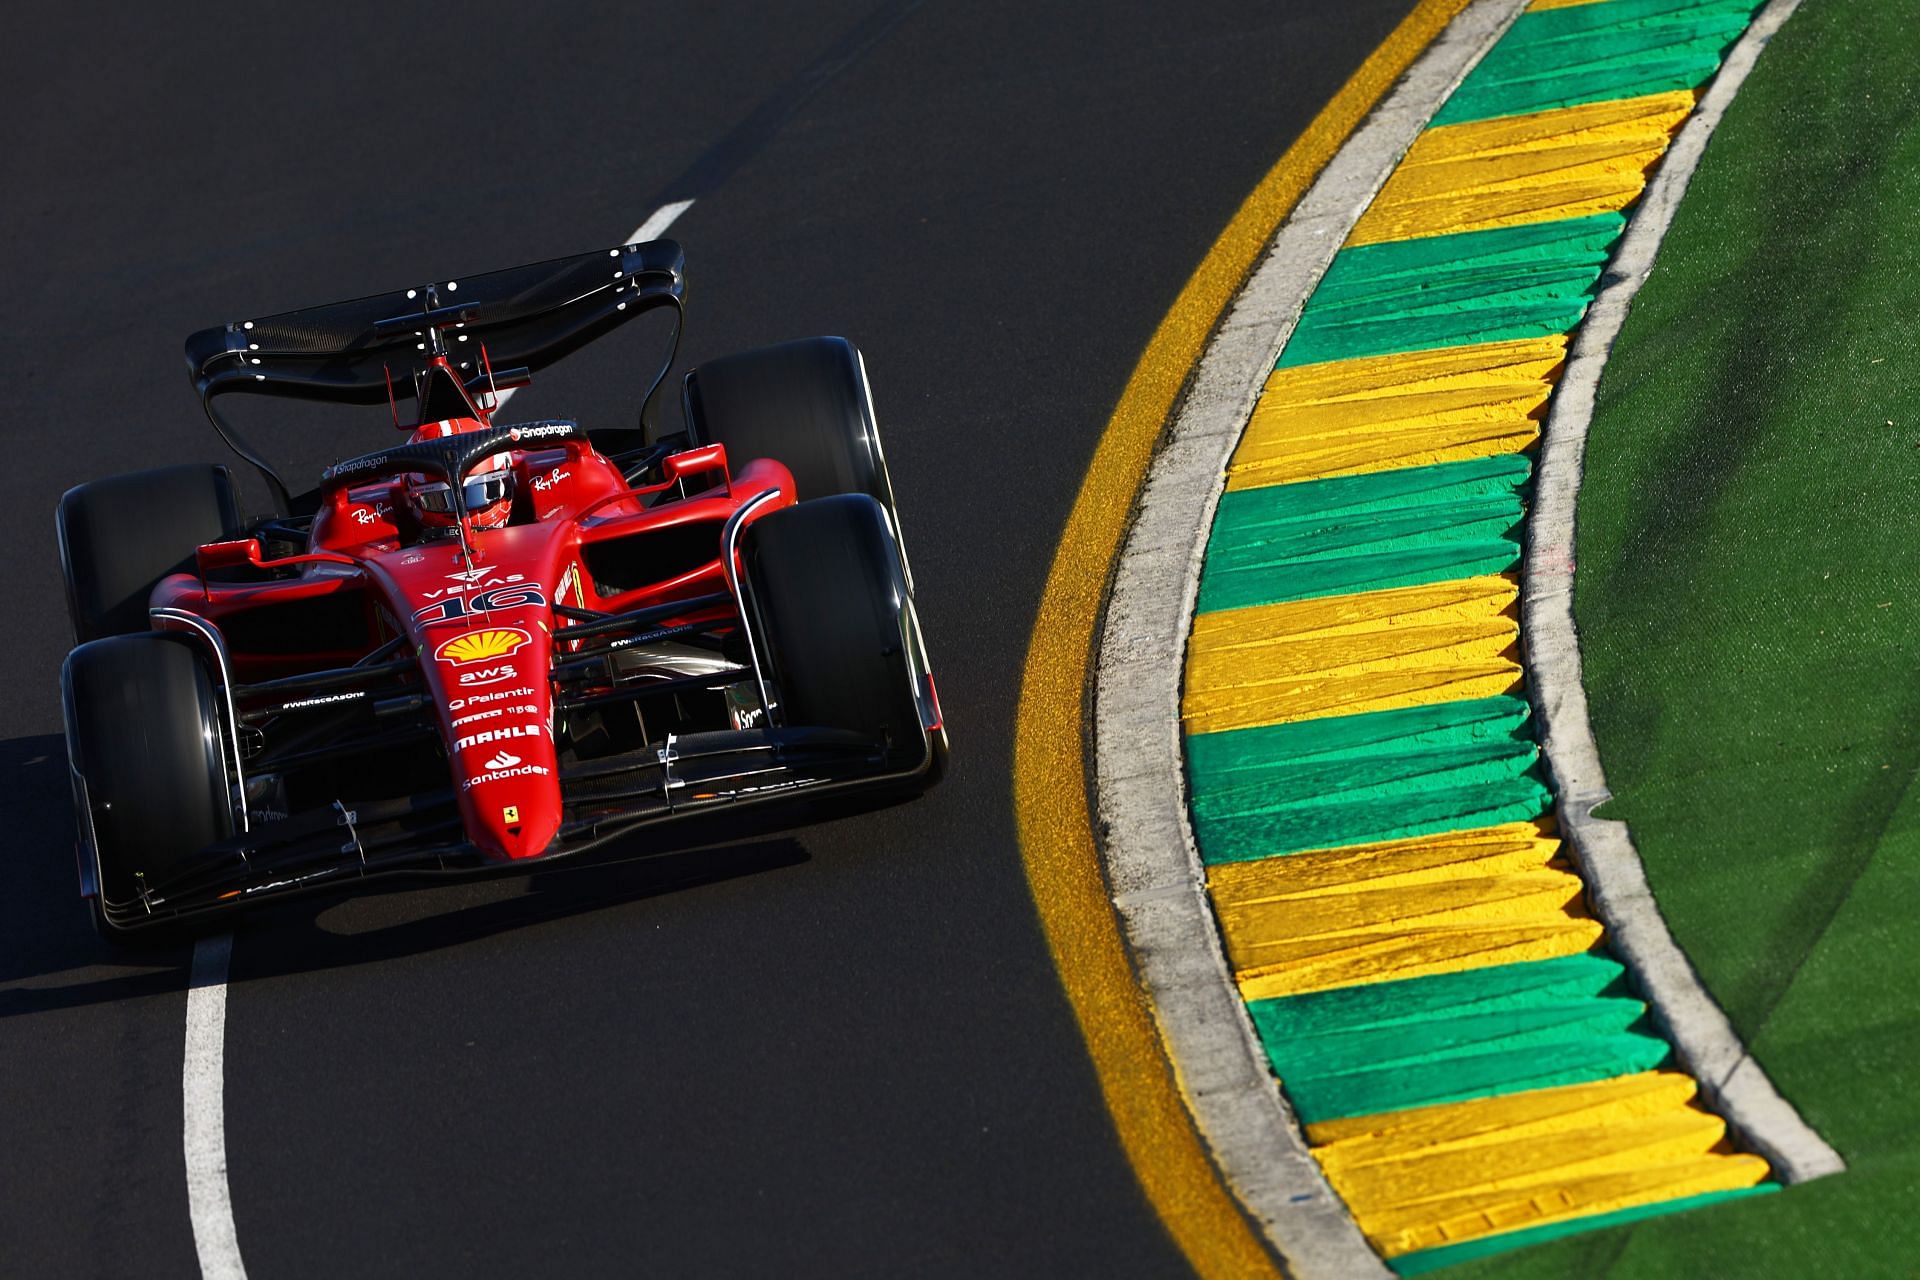 Charles Leclerc tested the upgraded floor the team brought to Australia during free practice sessions